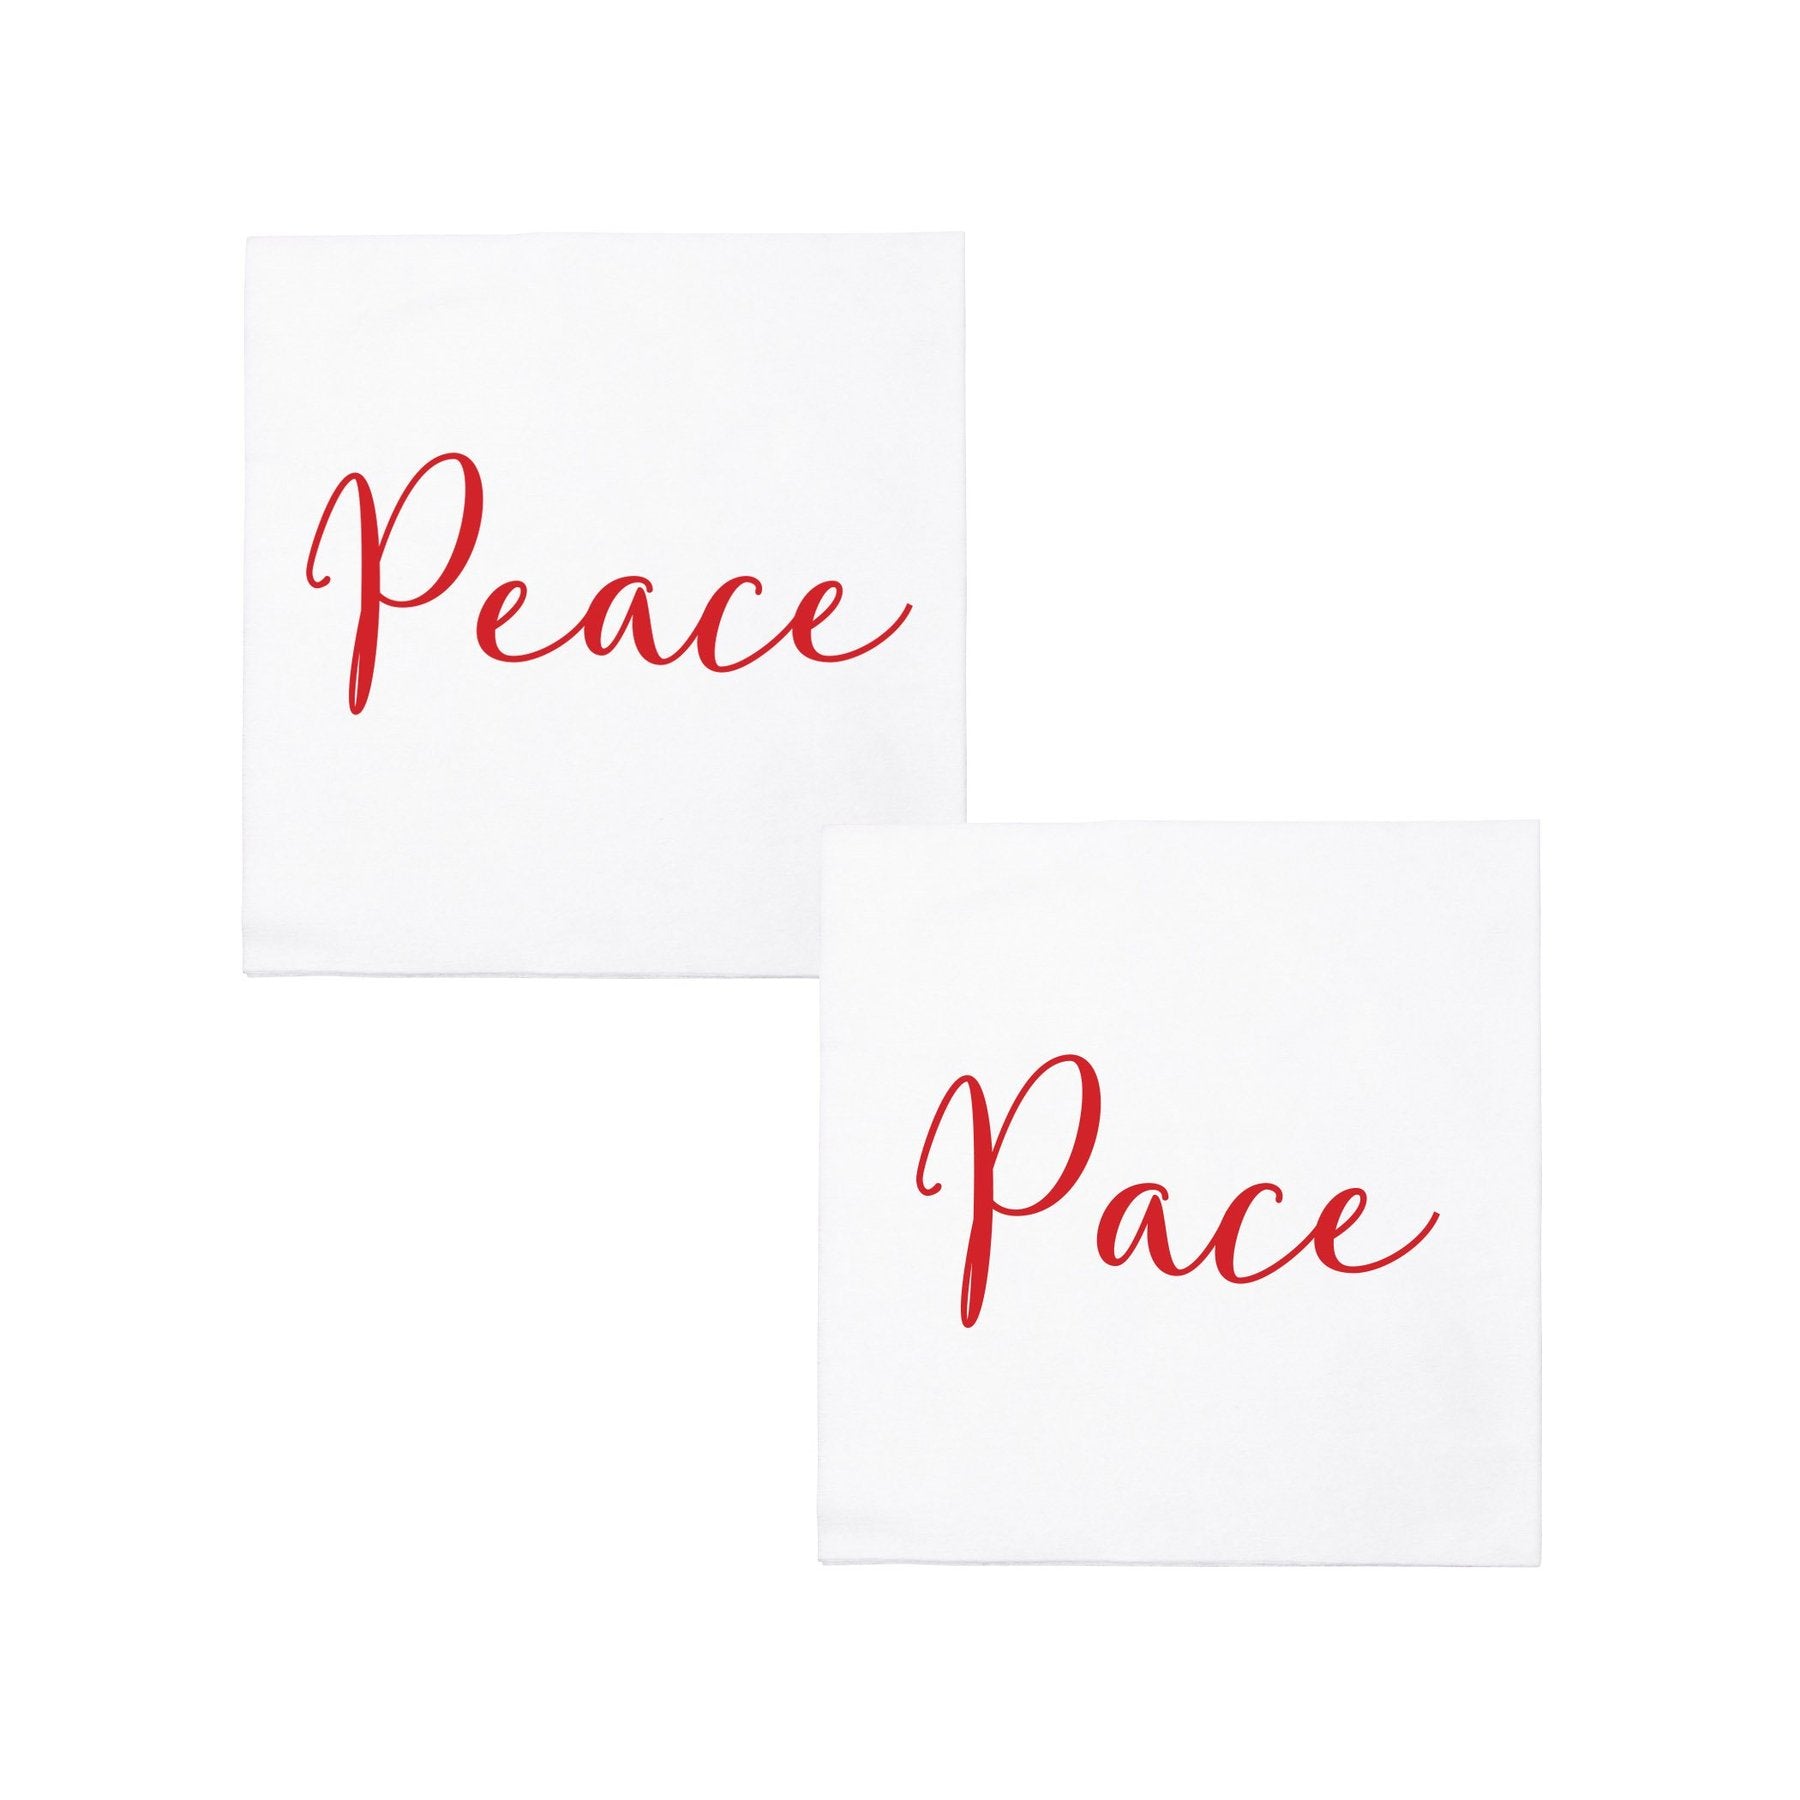 Papersoft Napkins Peace/Pace Cocktail Napkins - Pack of 20